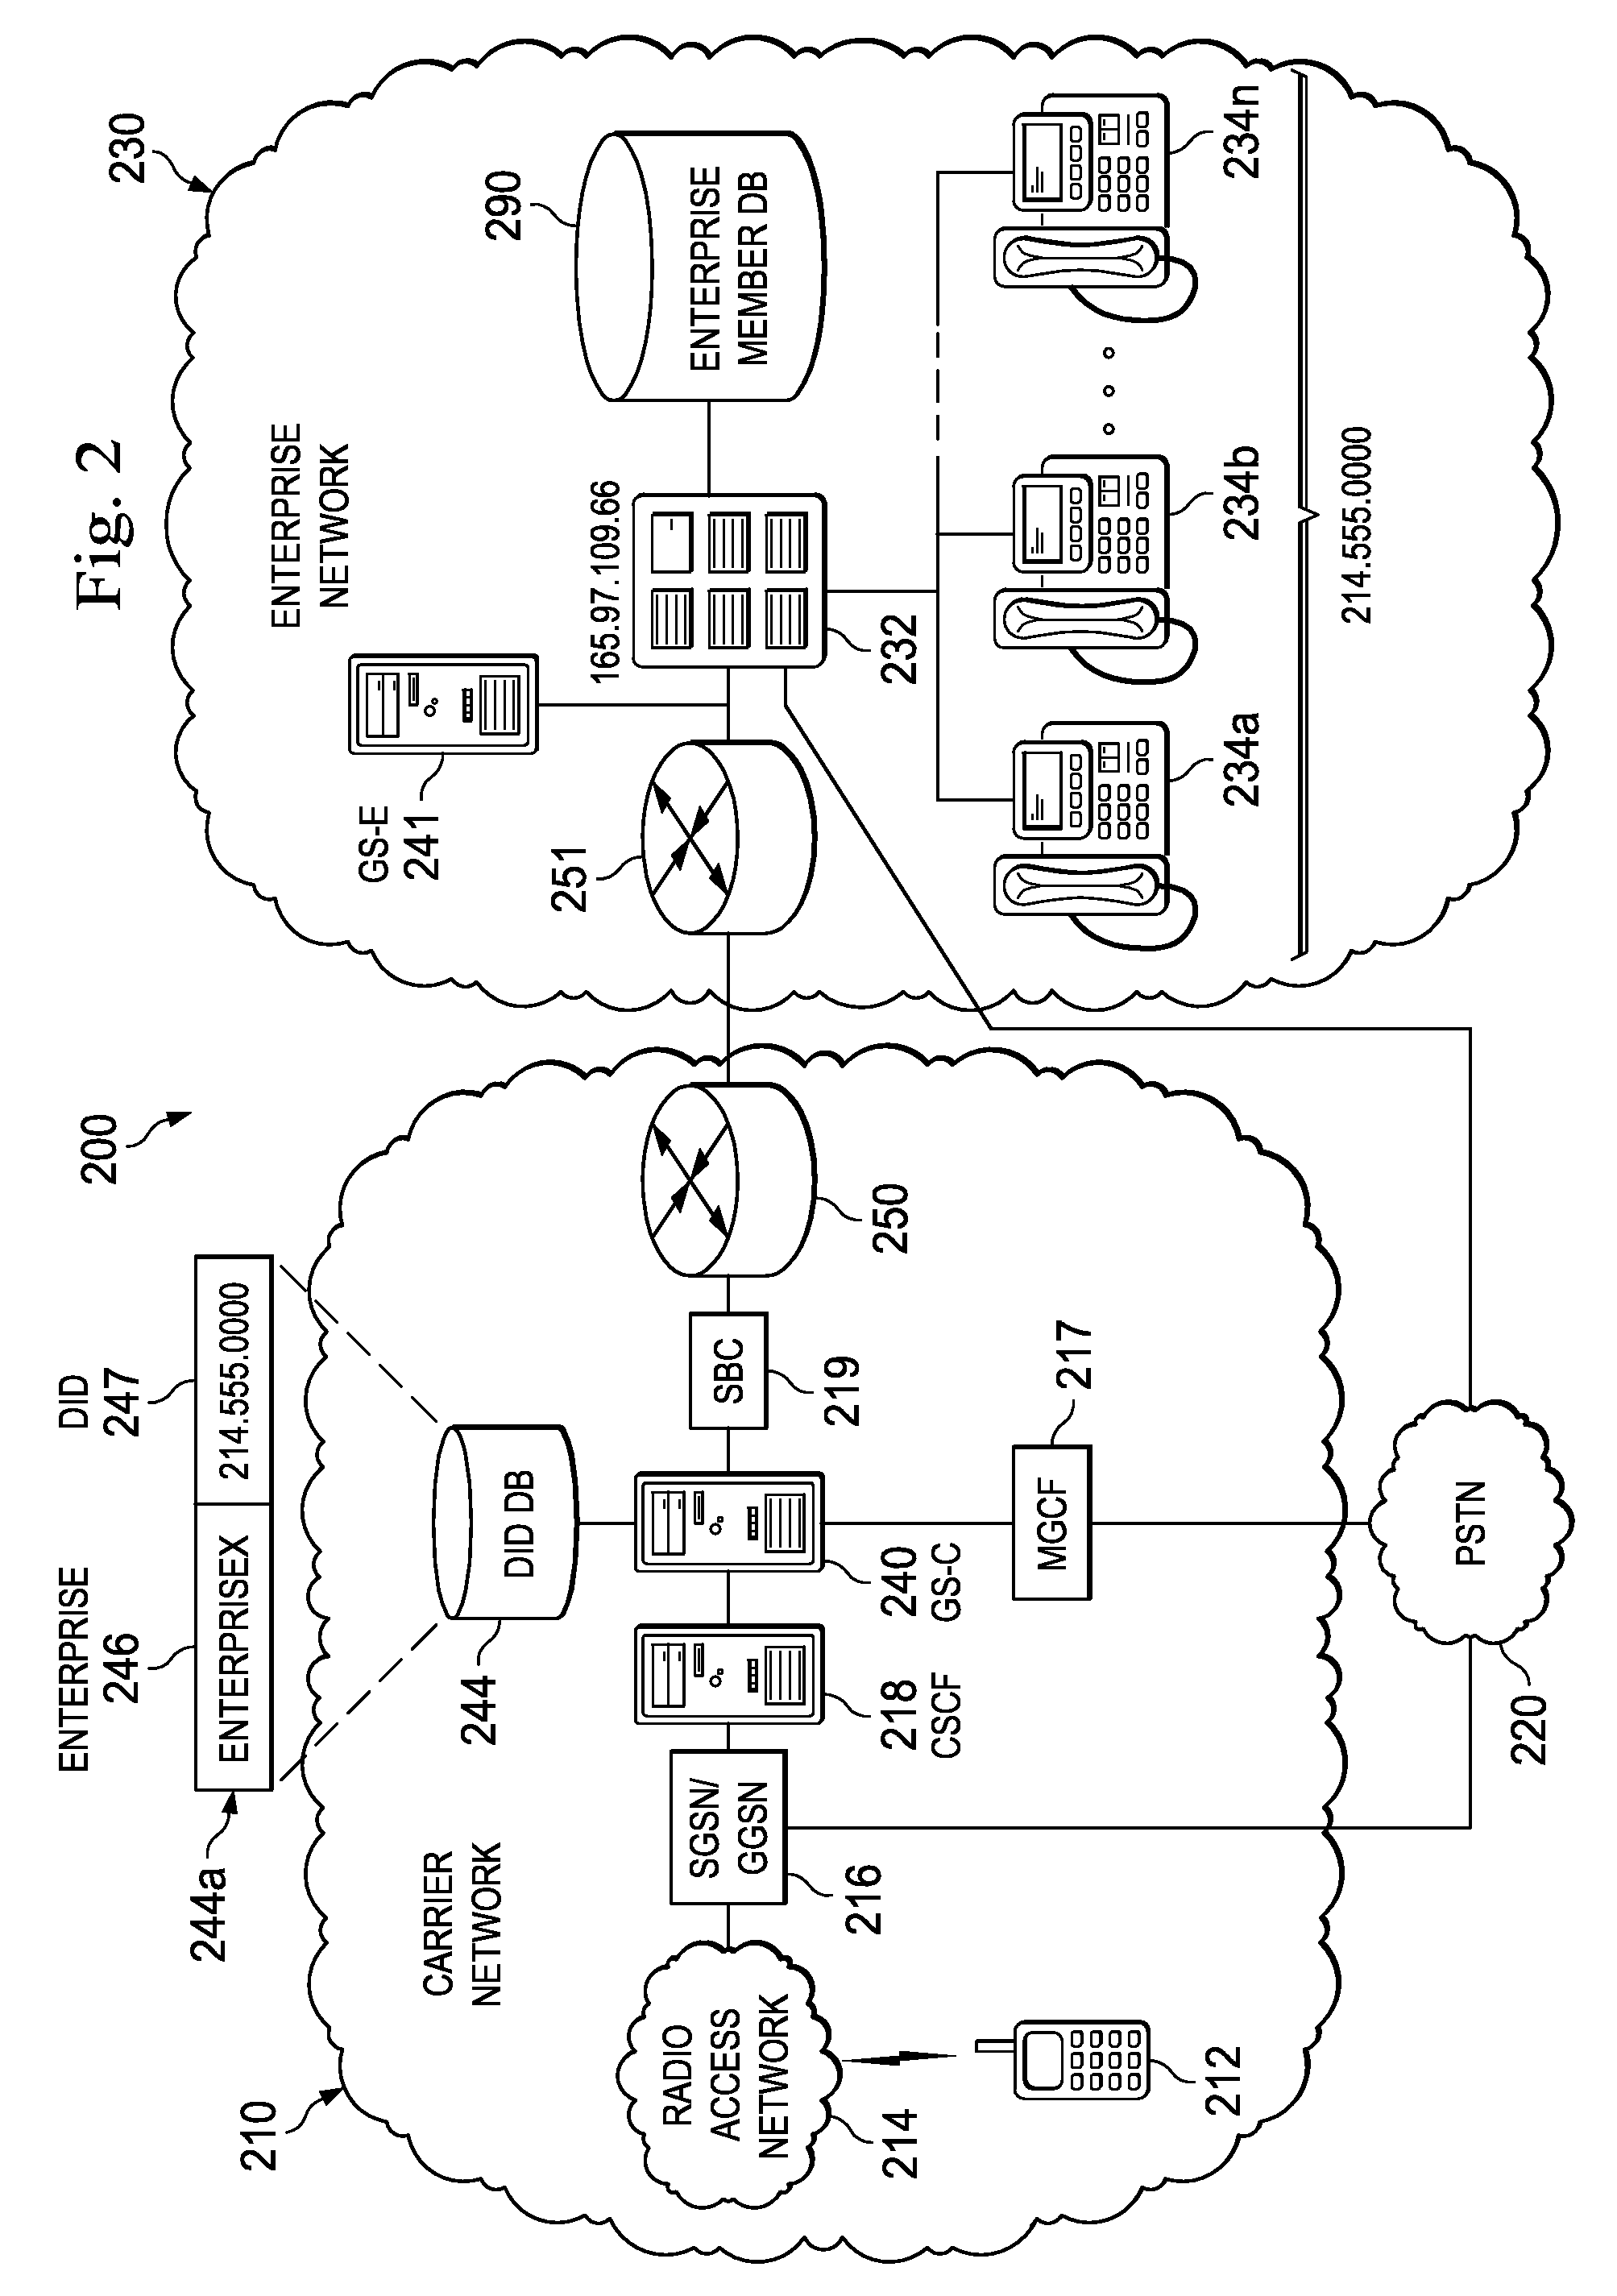 System, Method, and Computer-Readable Medium for By-Passing the Public Switched Telephone Network When Interconnecting an Enterprise Network and a Carrier Network